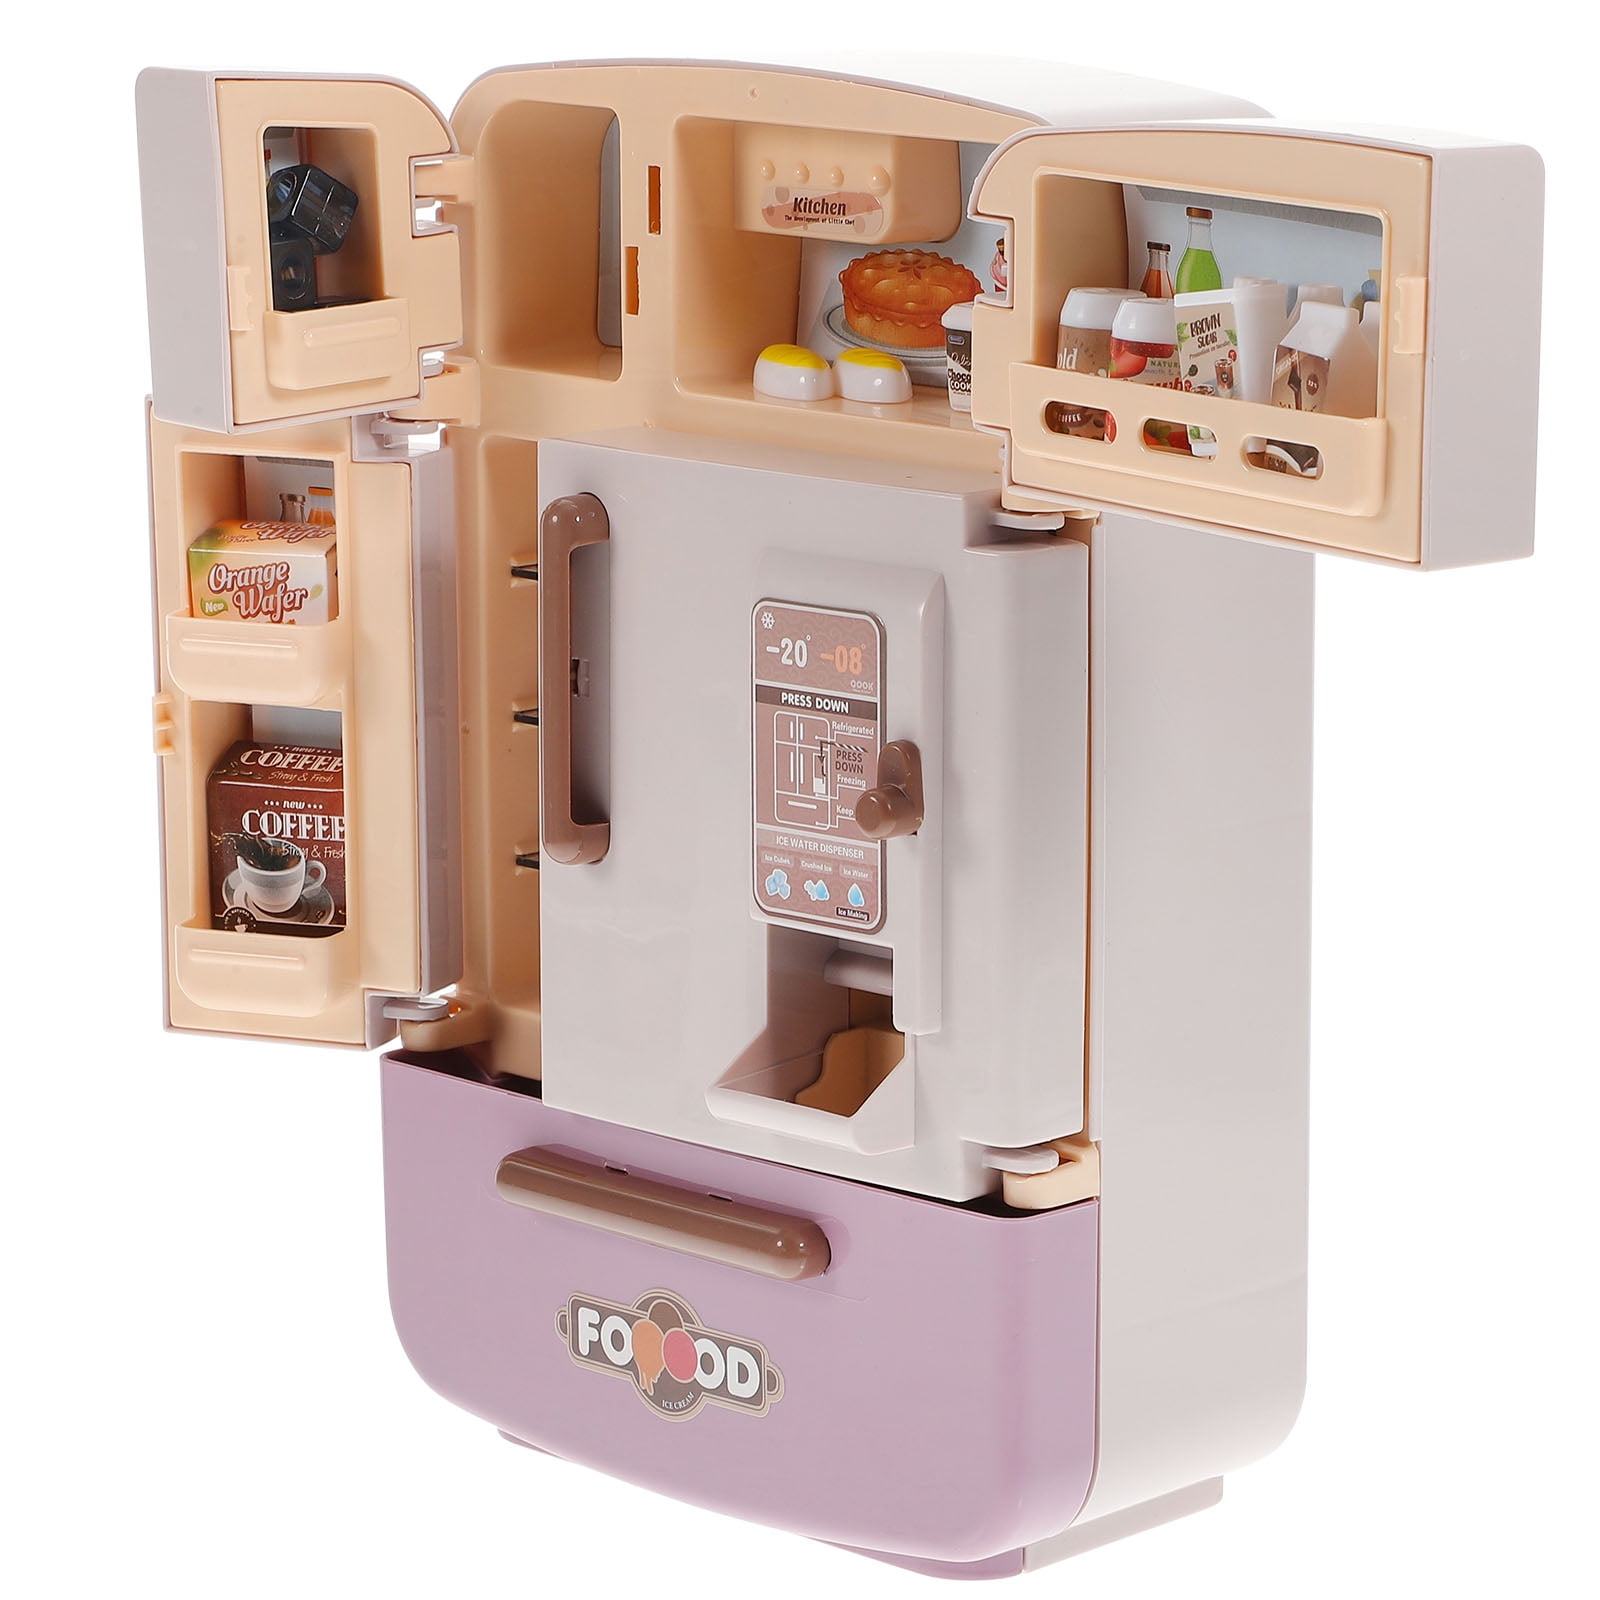 Little Treasures Mini Kitchen Appliance Cooking Toy Play Set - Includes A Pretend Play Mini Microwave, Coffee Maker and Mini Toy Fridge with Toy